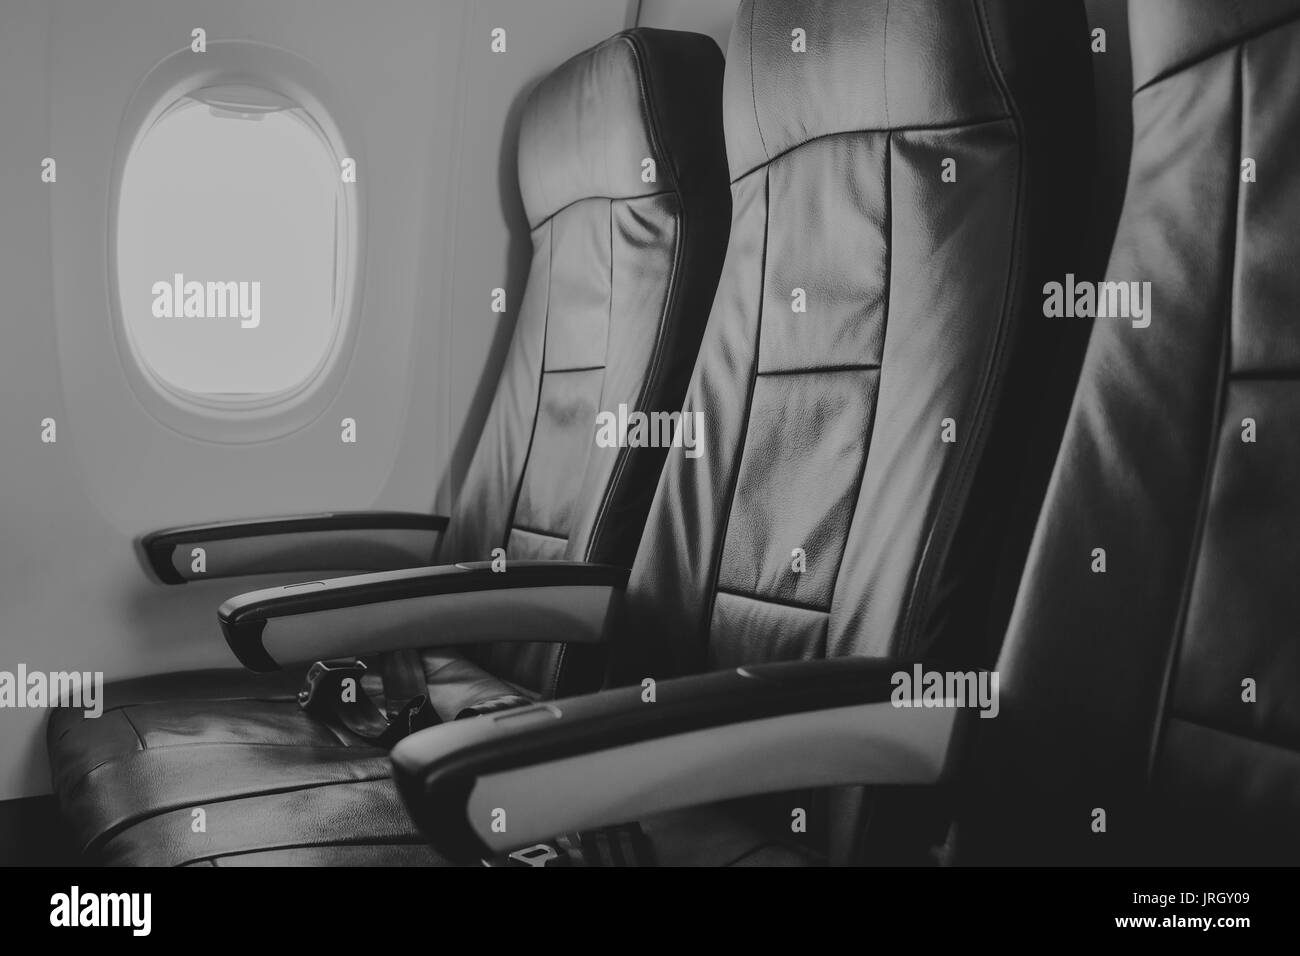 Interiors of new modern airliner Stock Photo